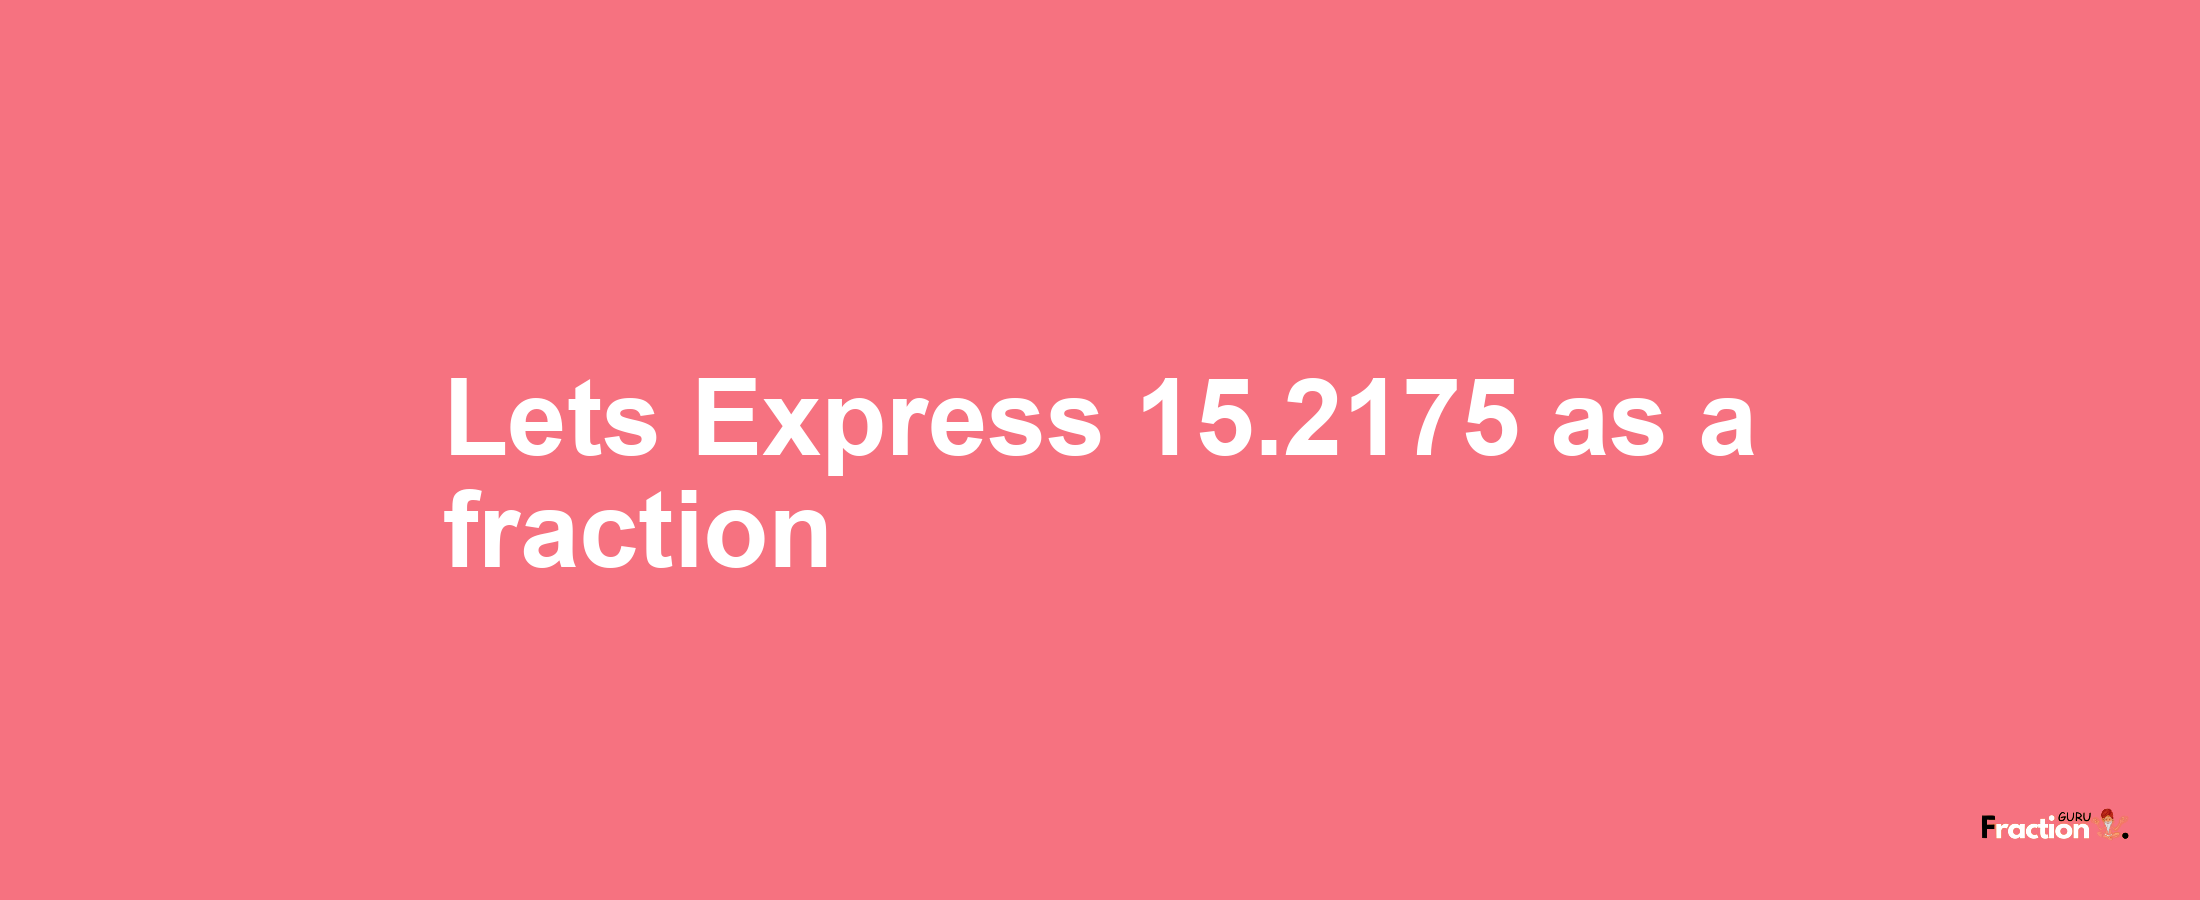 Lets Express 15.2175 as afraction